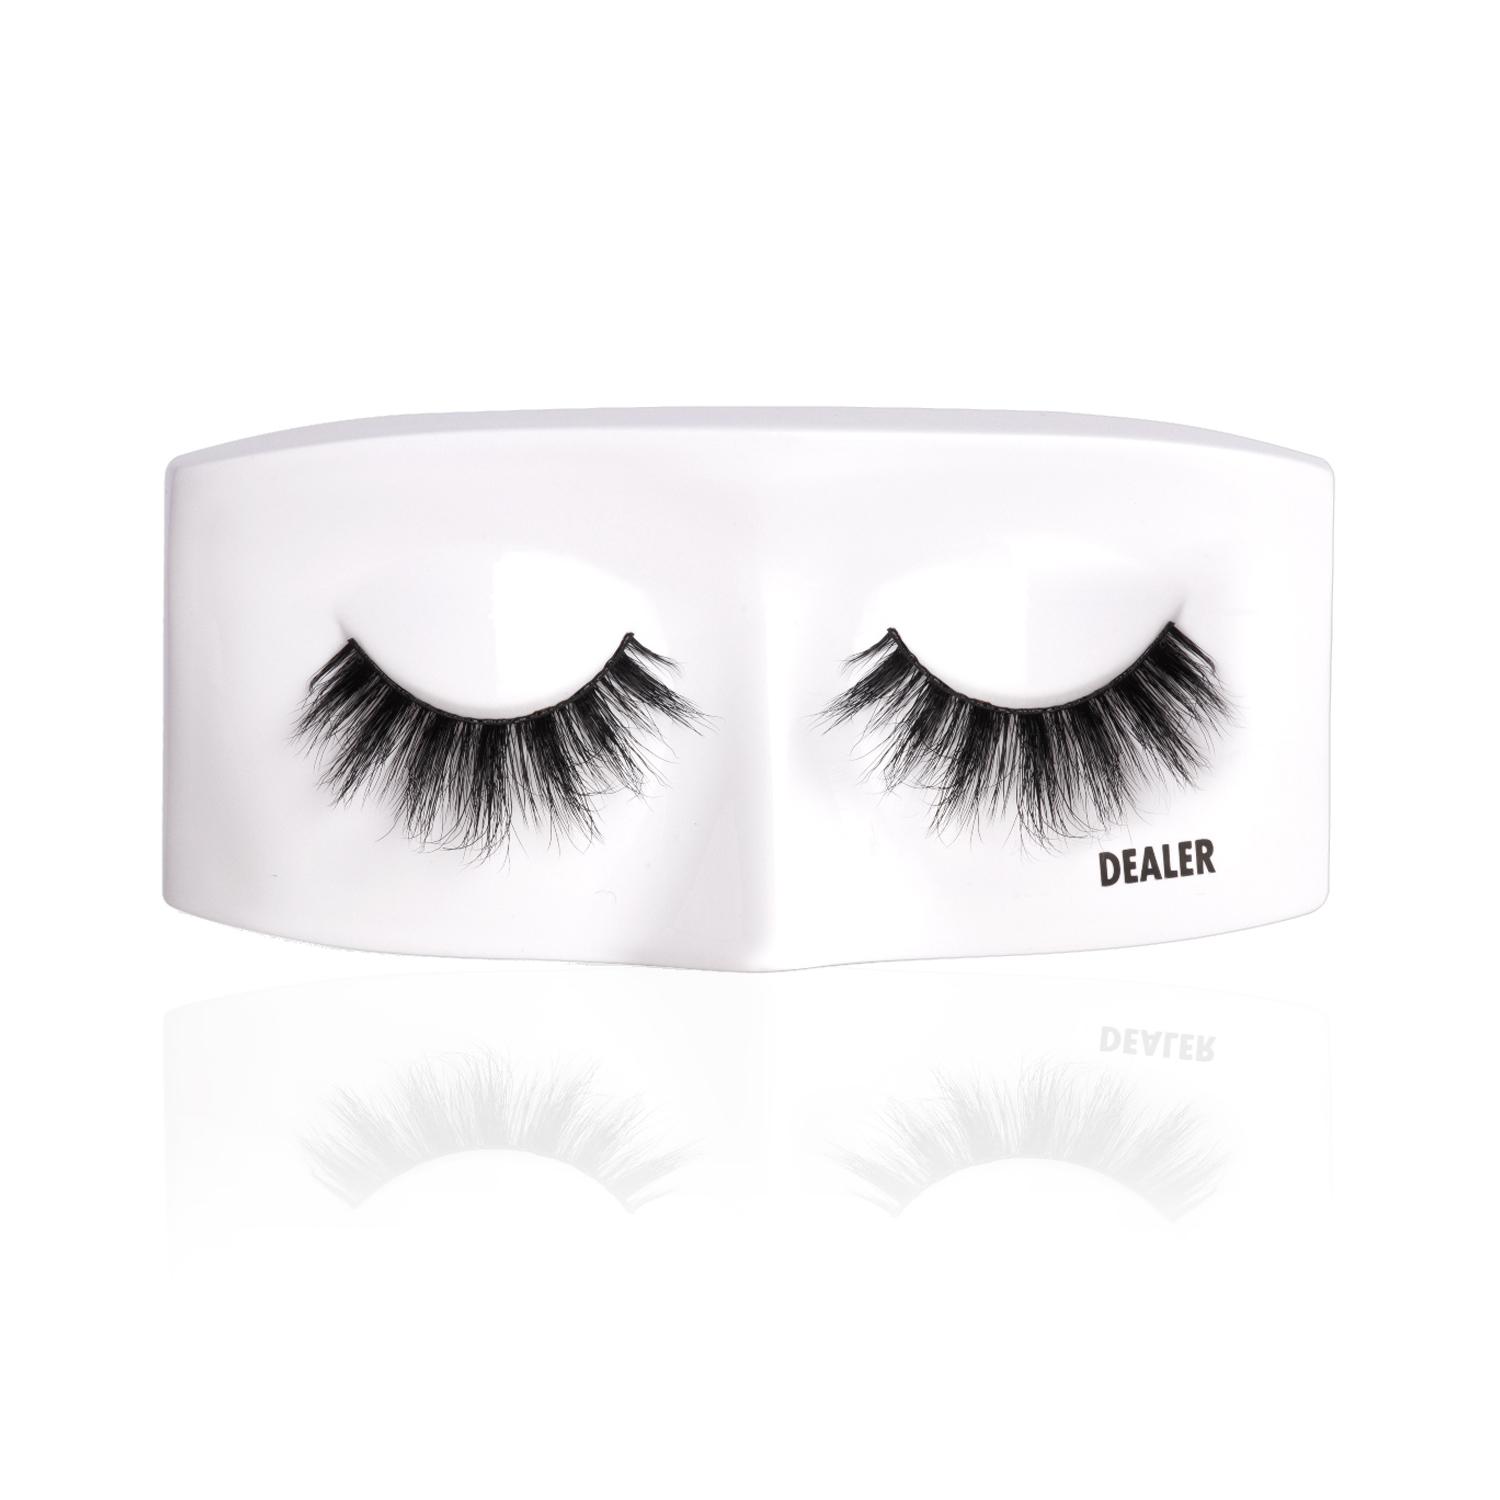 PAC | PAC Ace Of Lashes - Dealer (1 Pair)